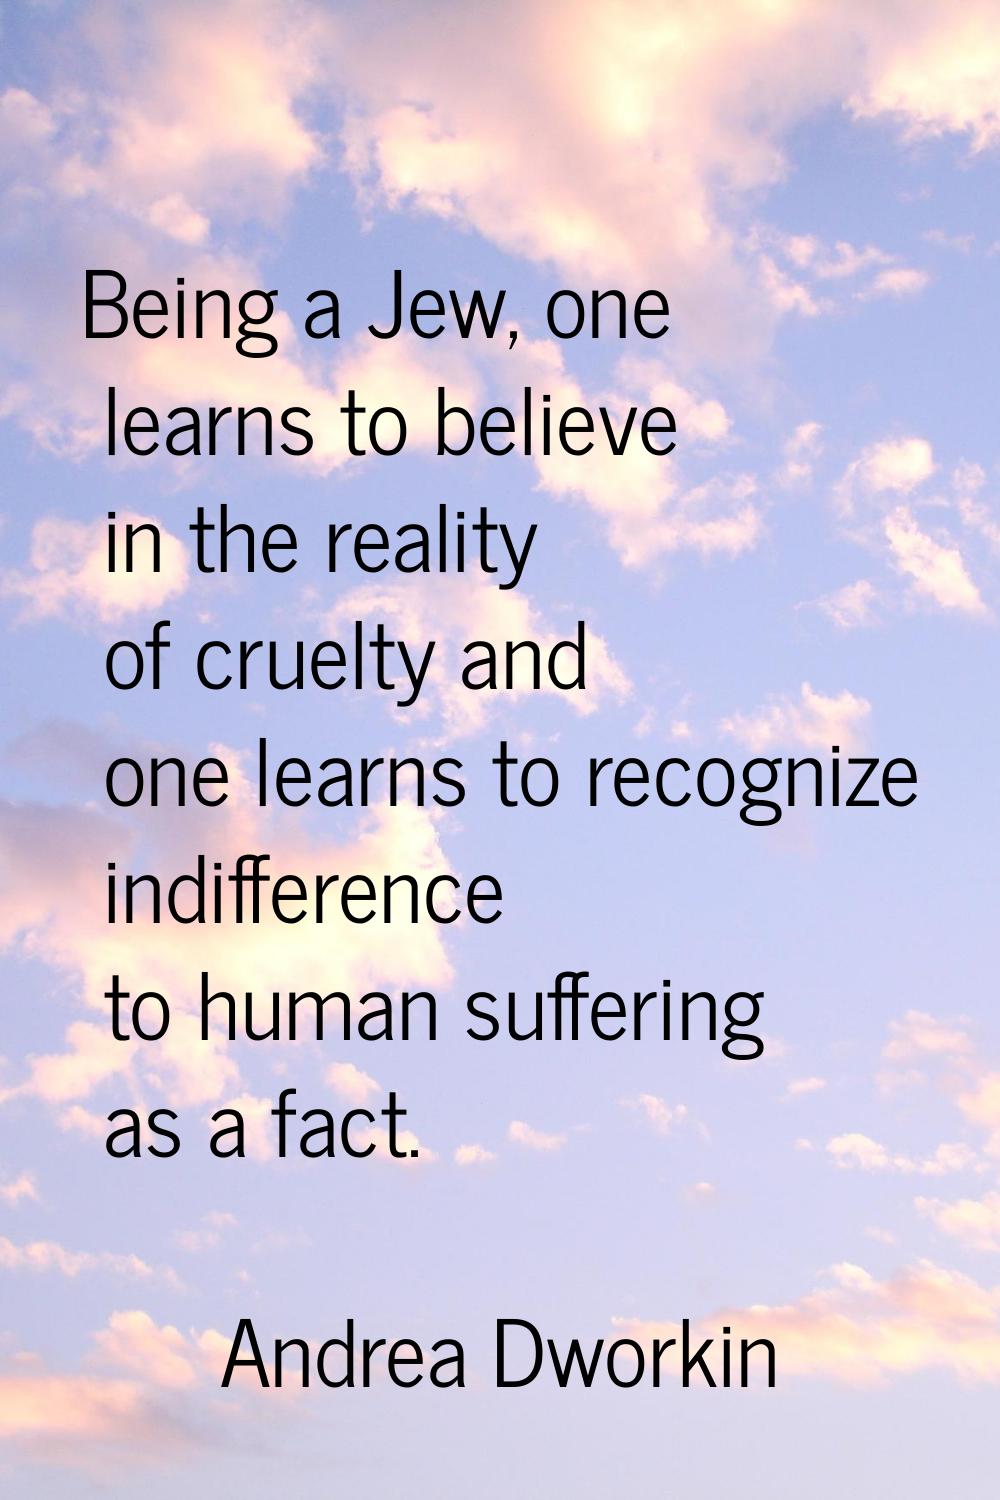 Being a Jew, one learns to believe in the reality of cruelty and one learns to recognize indifferen